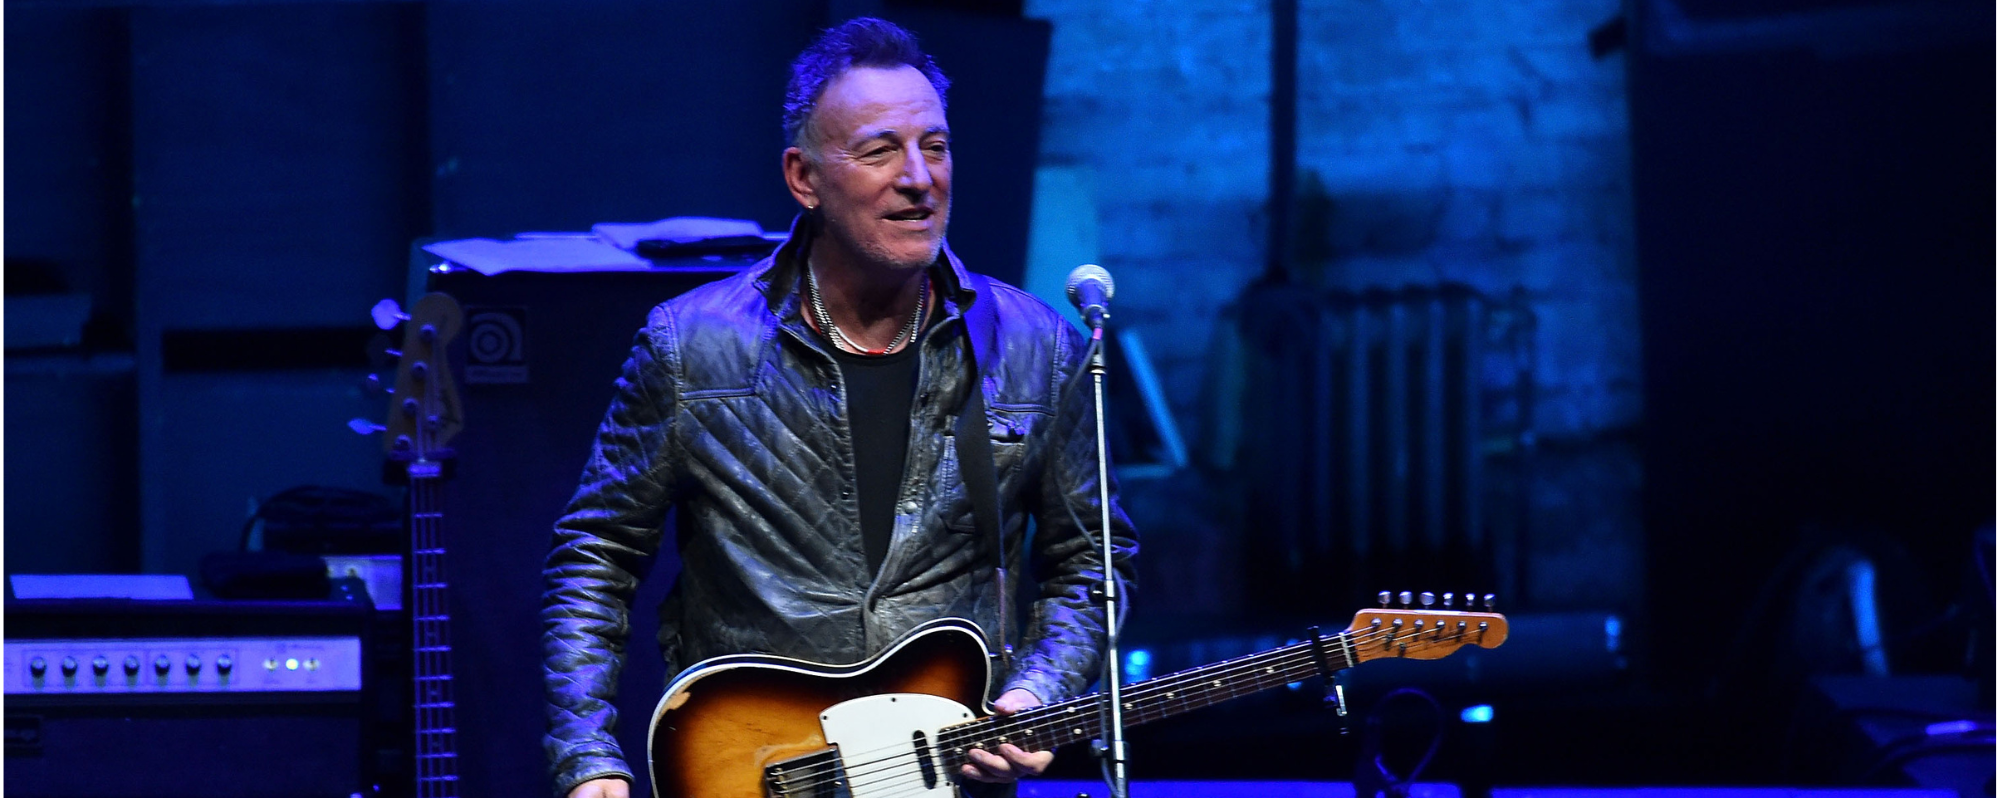 10 Songwriting Tips from Bruce Springsteen: “Anything That Starts Intellectually Usually Sucks”